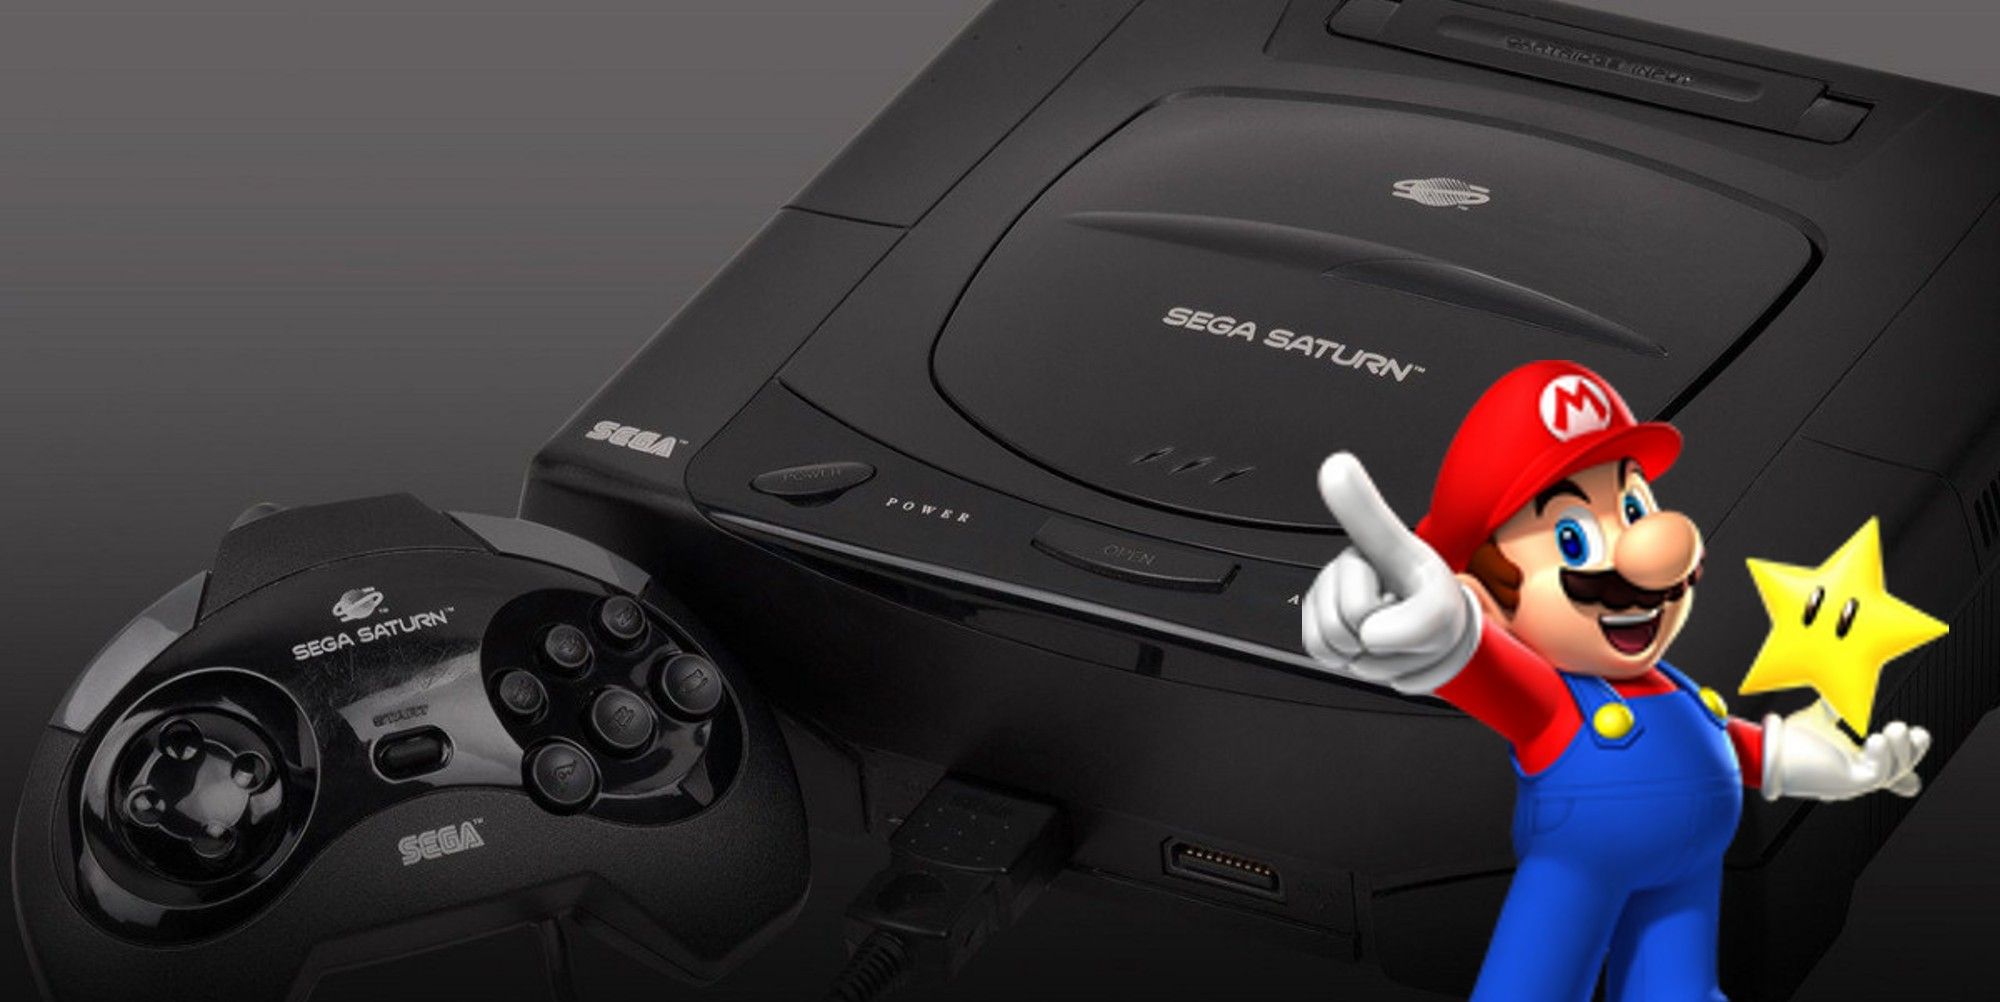 Mario Easter Egg Uncovered In Old Sega Saturn Game